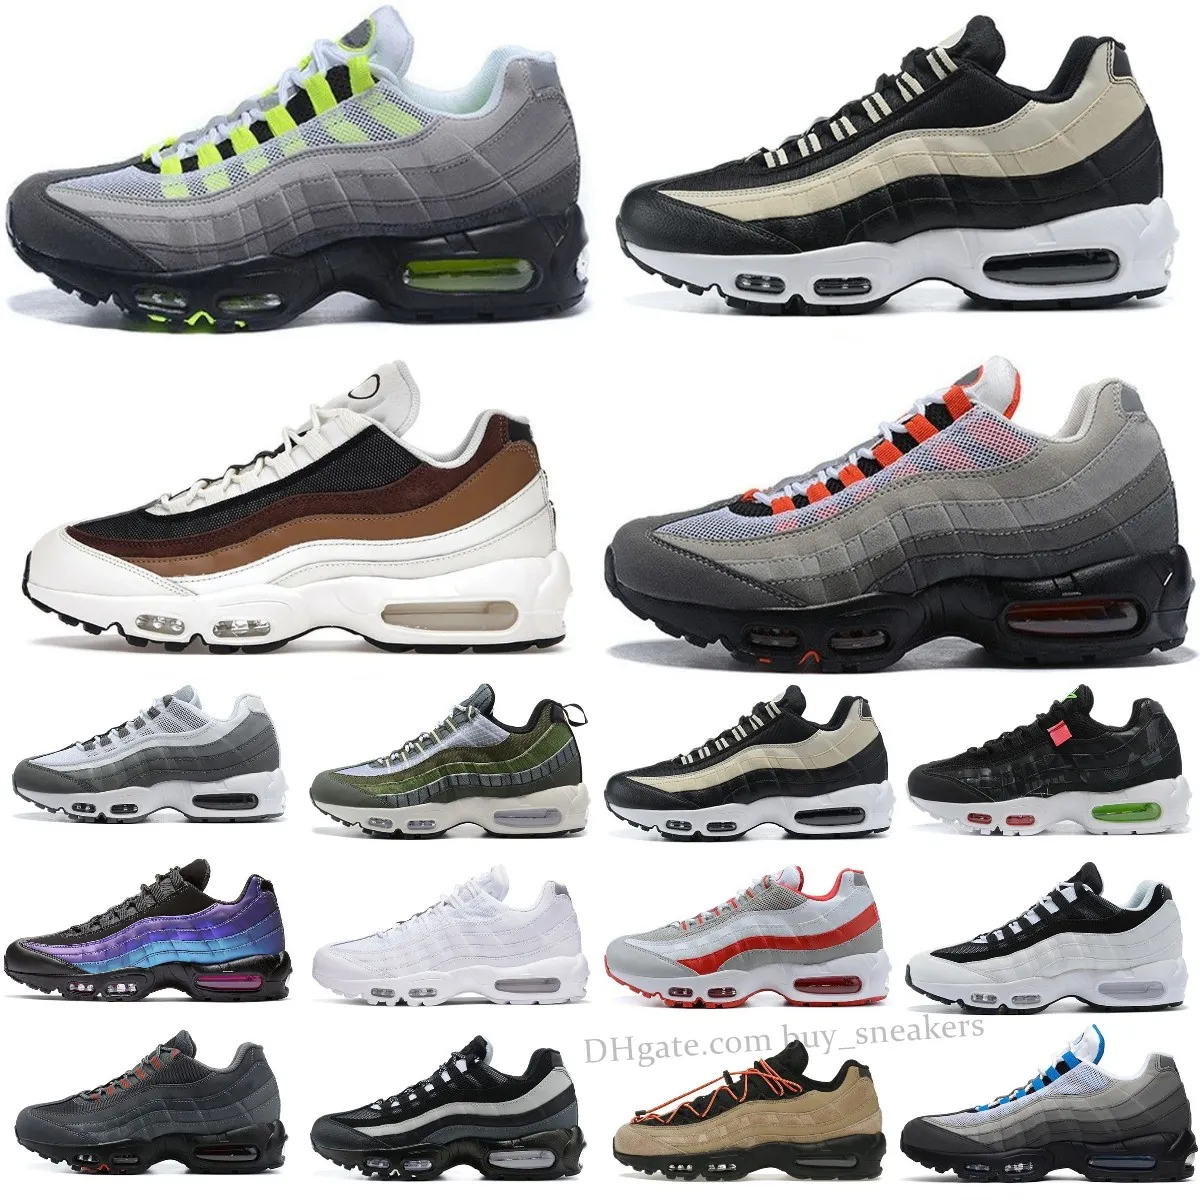 Designer 95 airmaxs men running shoes 95s Triple Black Worldwide air Bordeaux Neon Throwback Future Club max mens womens trainers sports sneakers runners